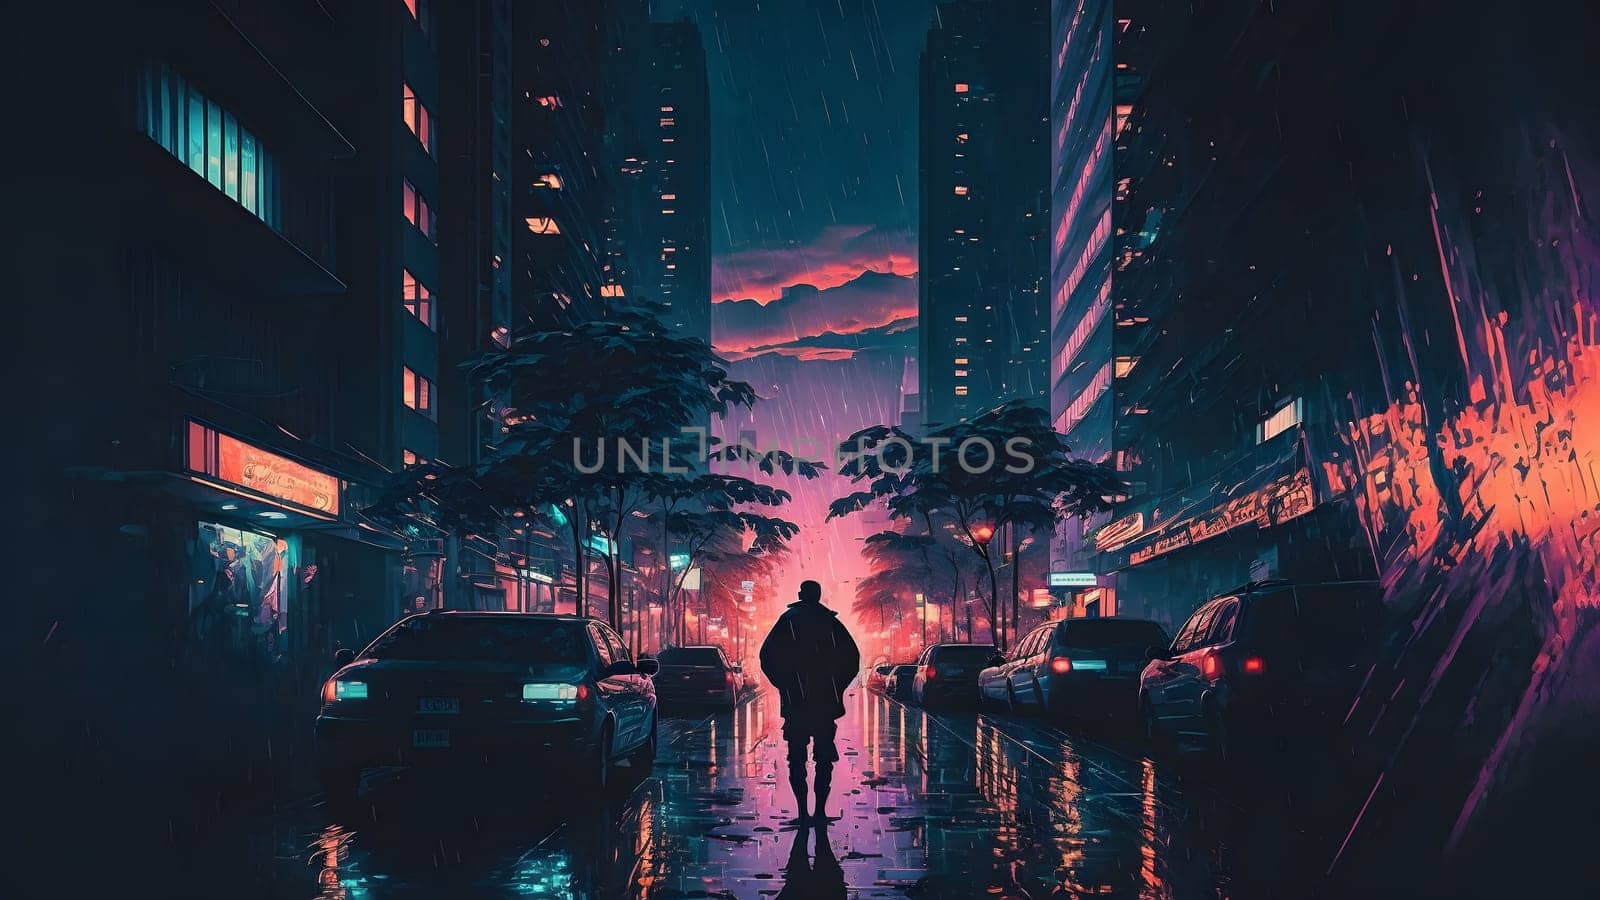 rainy night in cyberpunk city street, neural network generated art. Digitally generated image. Not based on any actual person, scene or pattern.